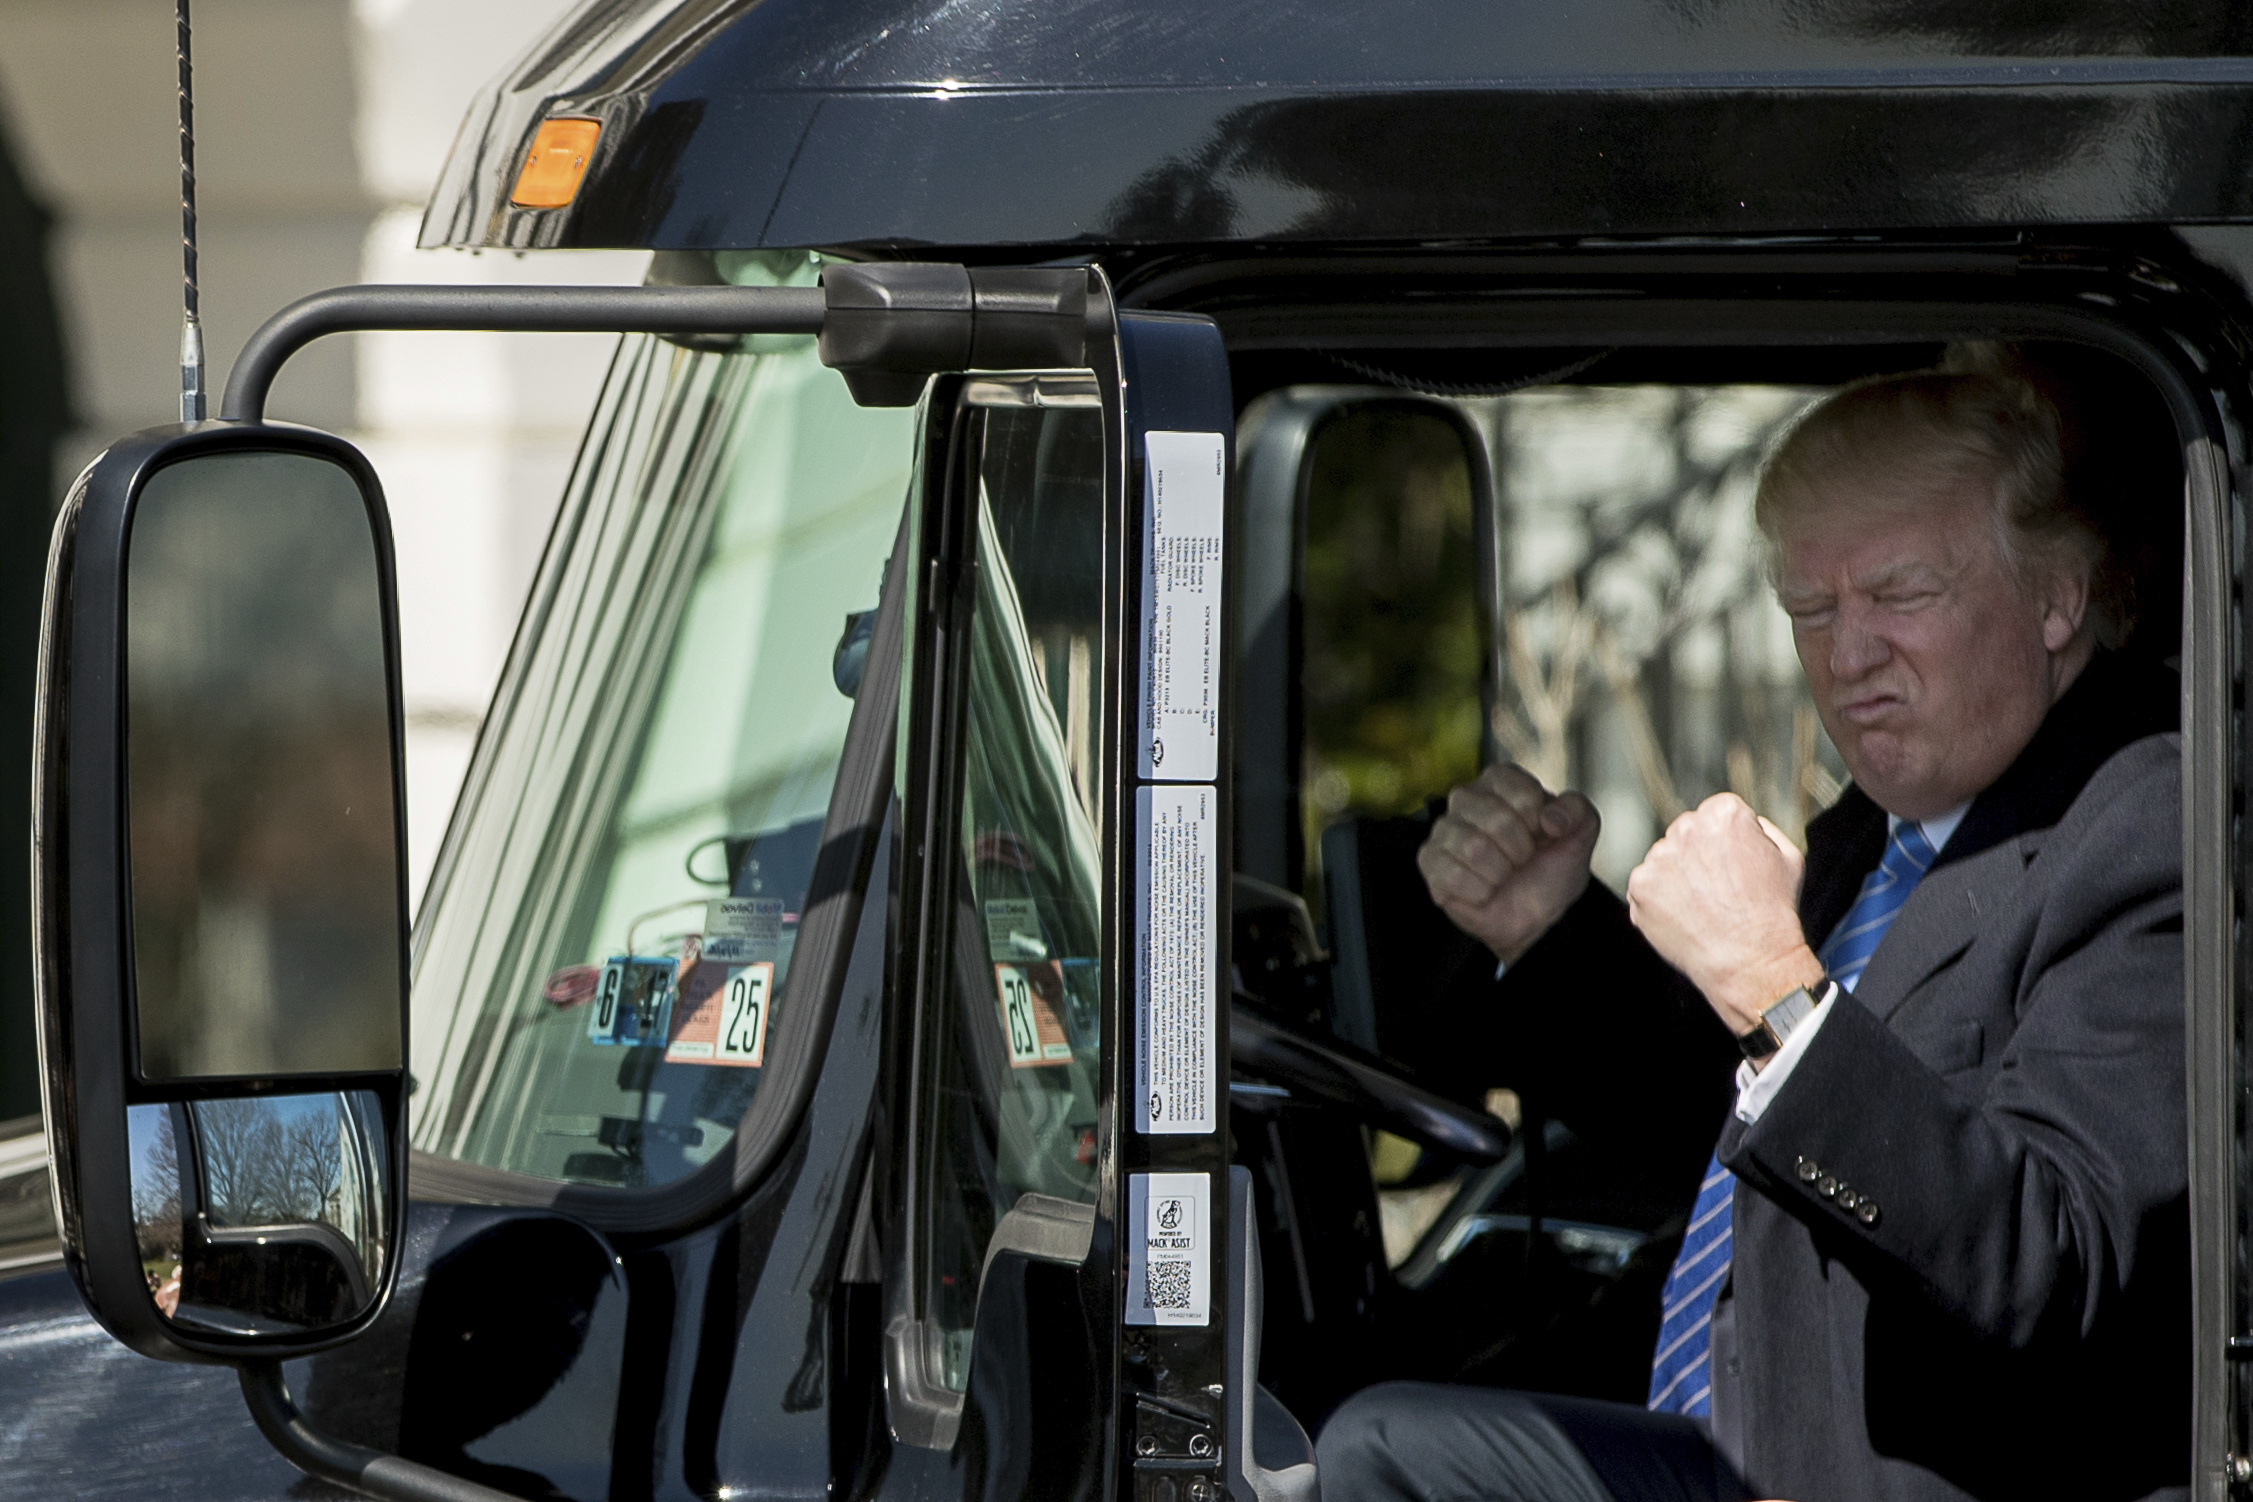 PHOTO: President Donald Trump gestures while sitting in an 18-wheeler truck while meeting with truckers and CEOs regarding healthcare on the South Lawn of the White House in Washington, March 23, 2017.